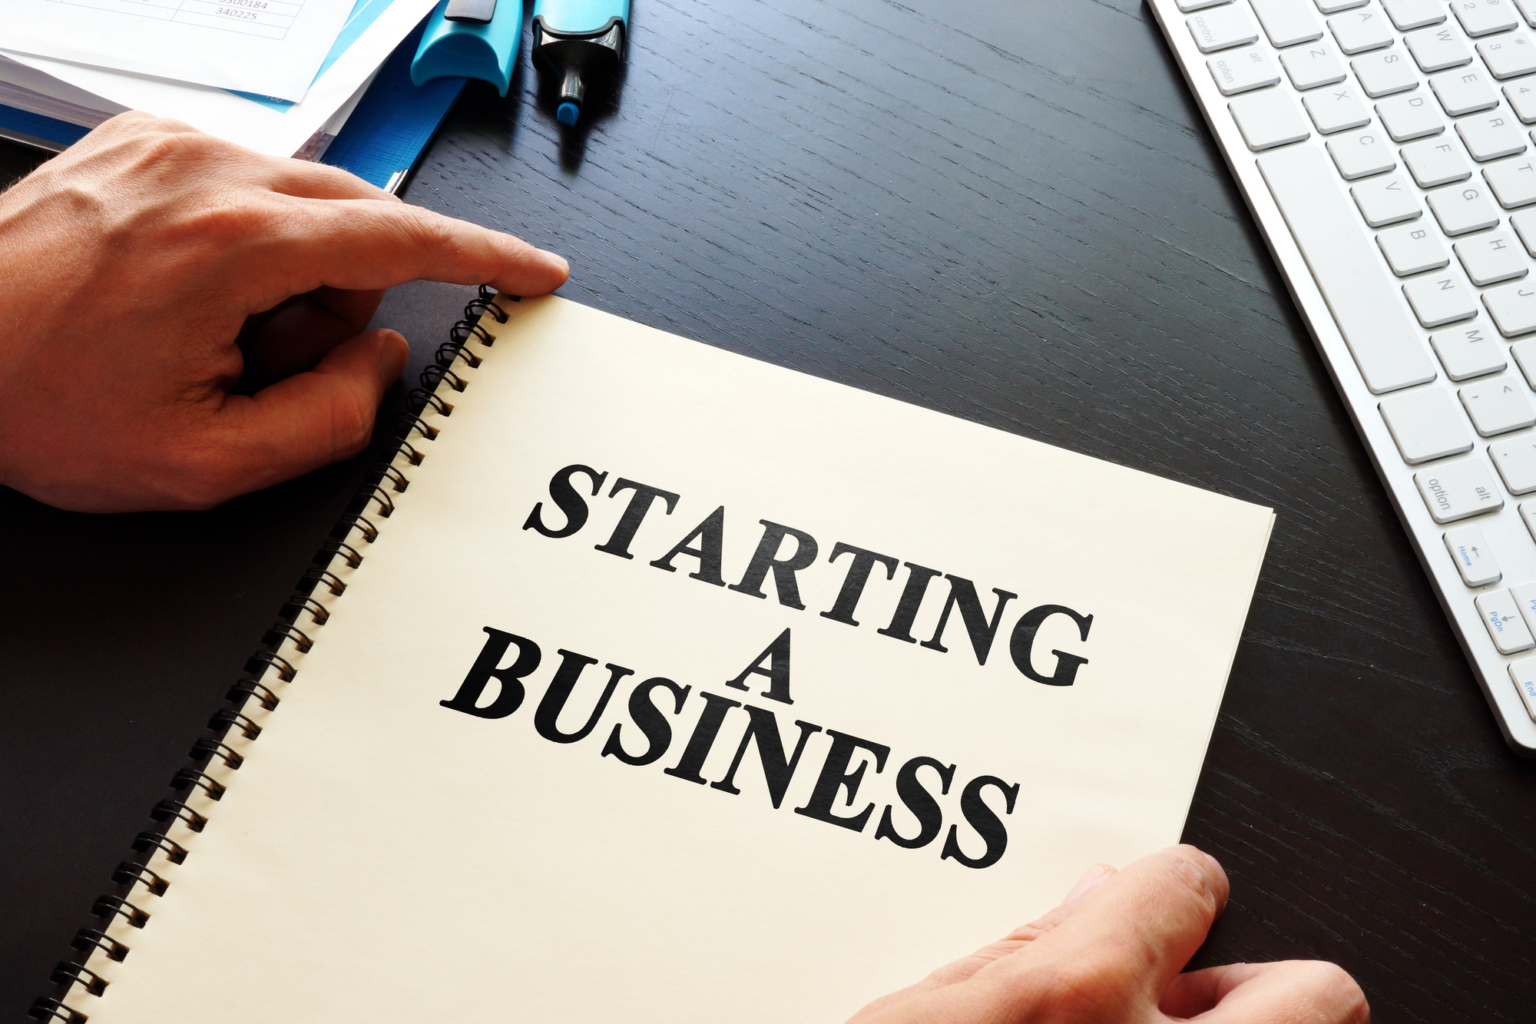 What business to start in North Cyprus?